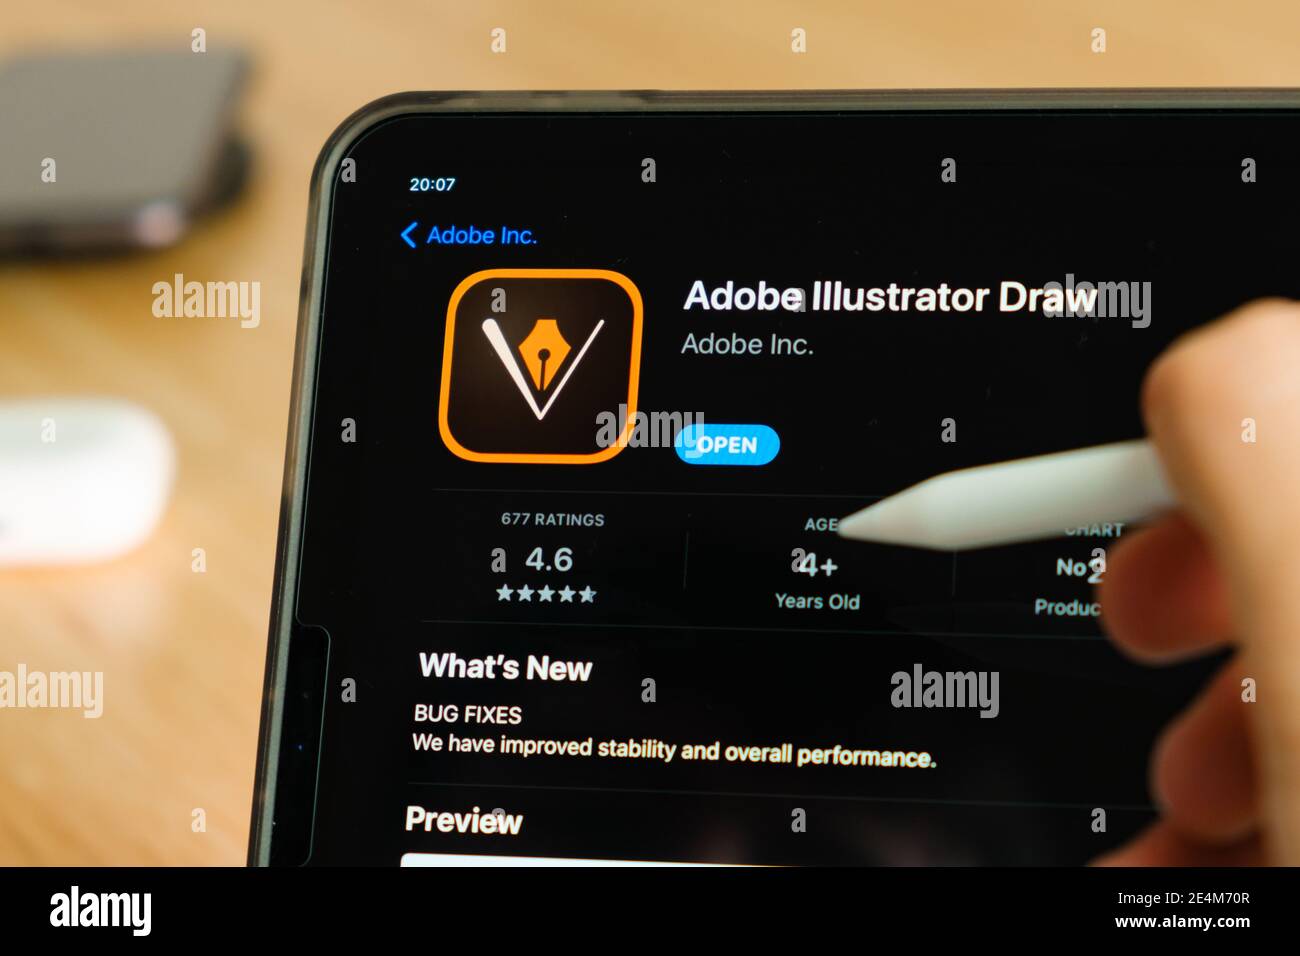 Adobe Illustrator Draw Logo Shown By Apple Pencil On The Ipad Pro Tablet Screen Man Using Application On The Tablet December San Francisco Stock Photo Alamy